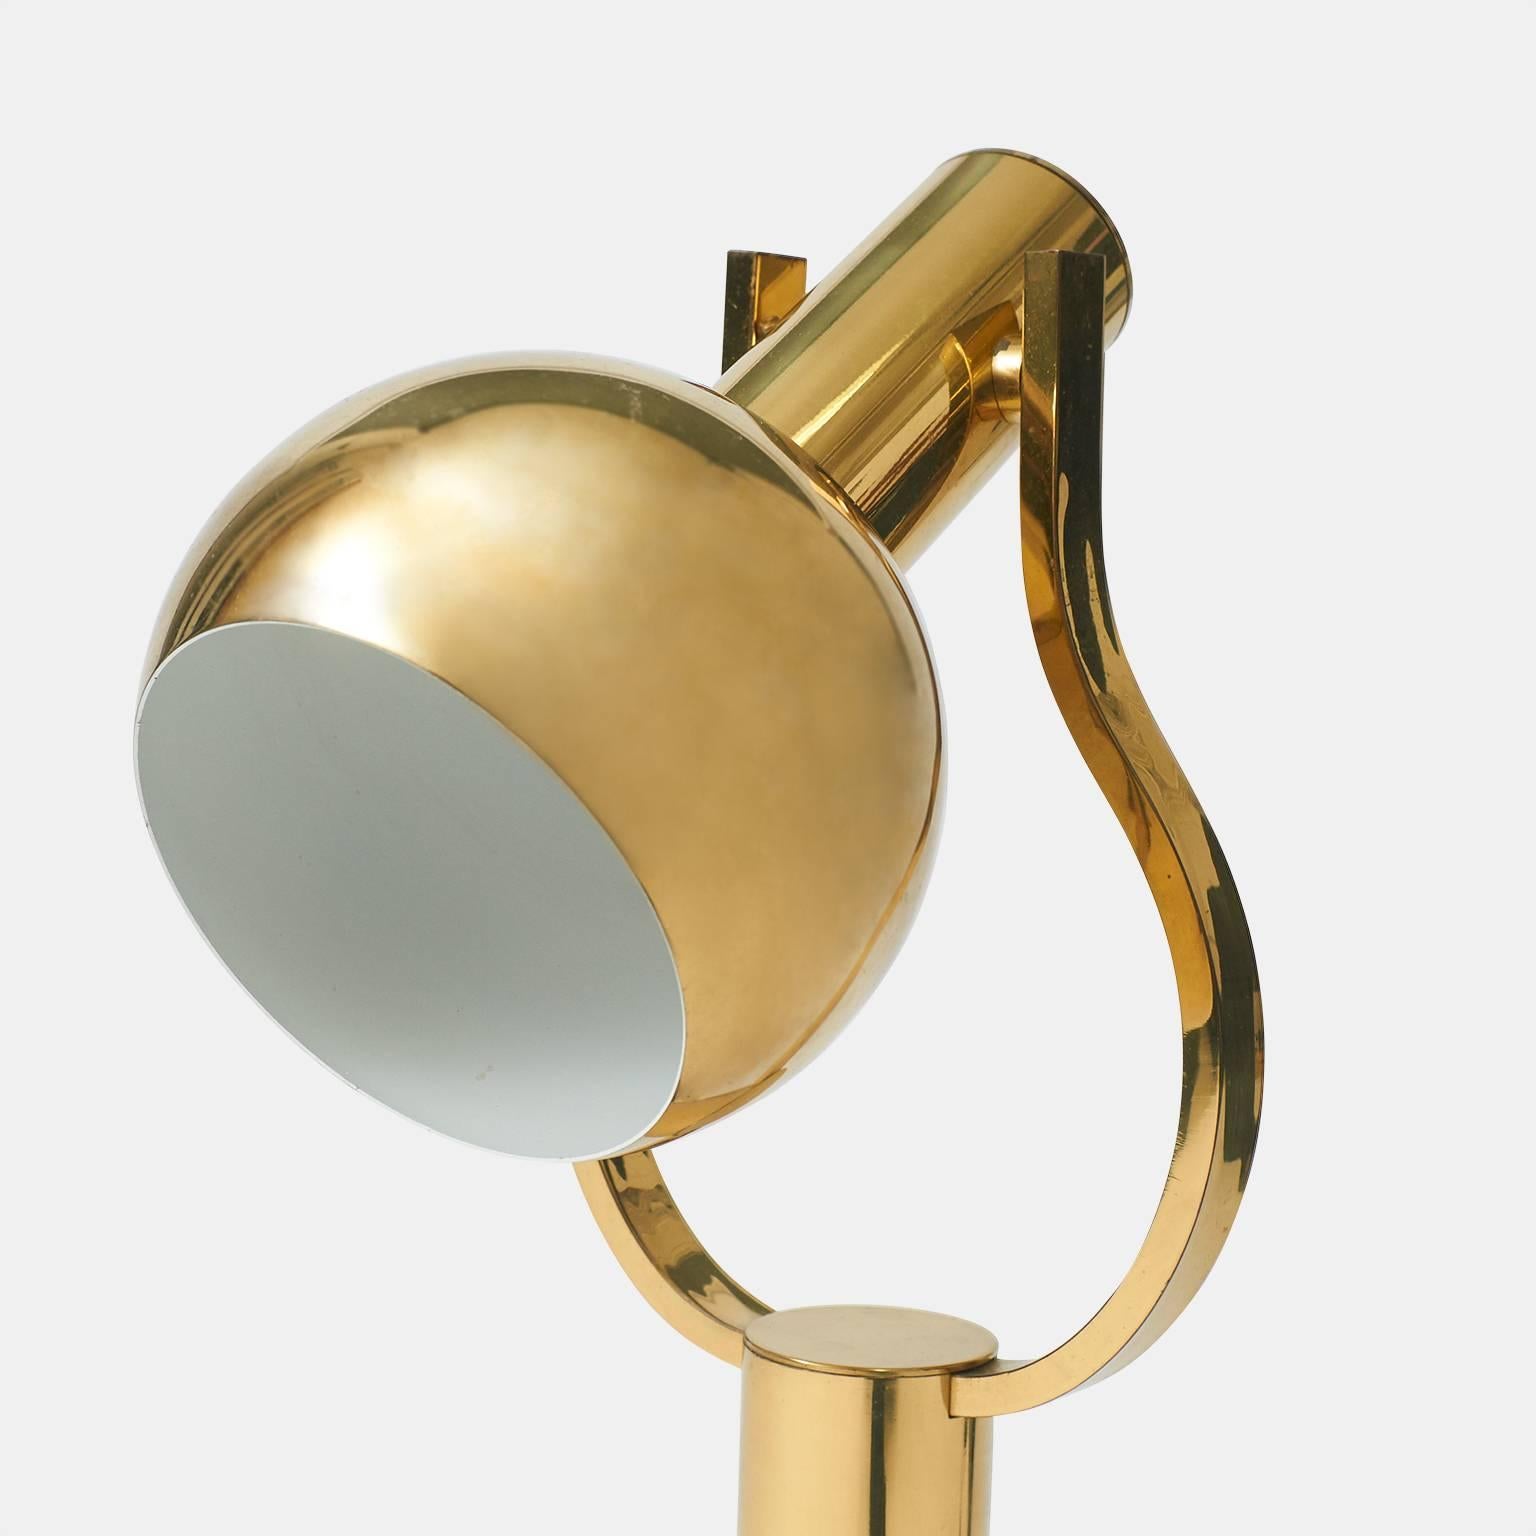 Pair of Adjustable Brass Table Lamp by Staff Leuchten In Good Condition For Sale In San Francisco, CA